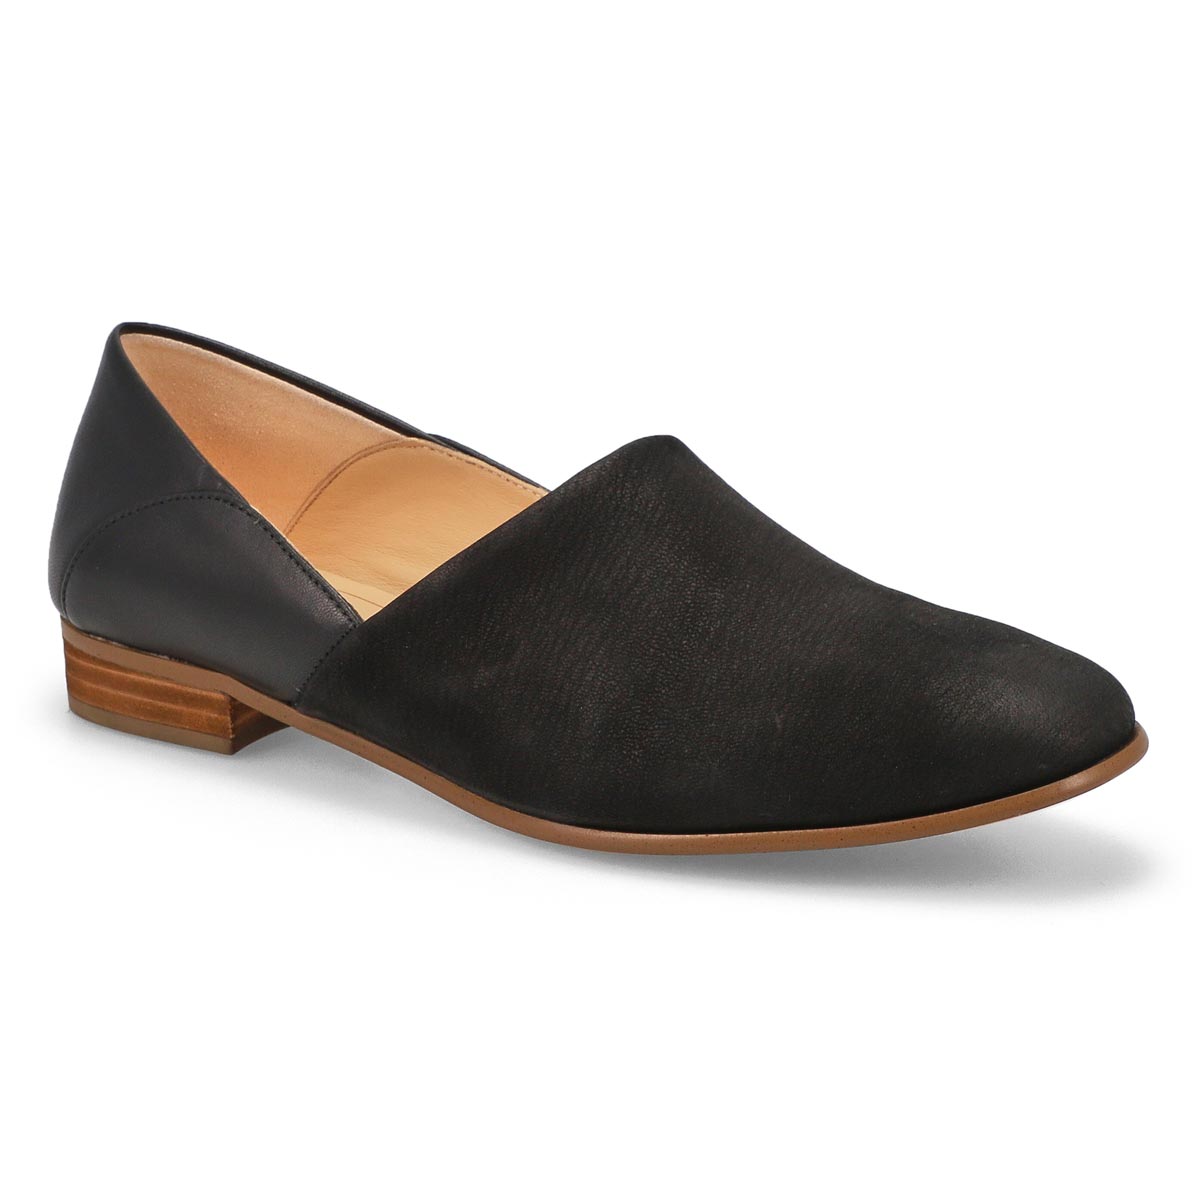 clarks women's pure tone loafer flat